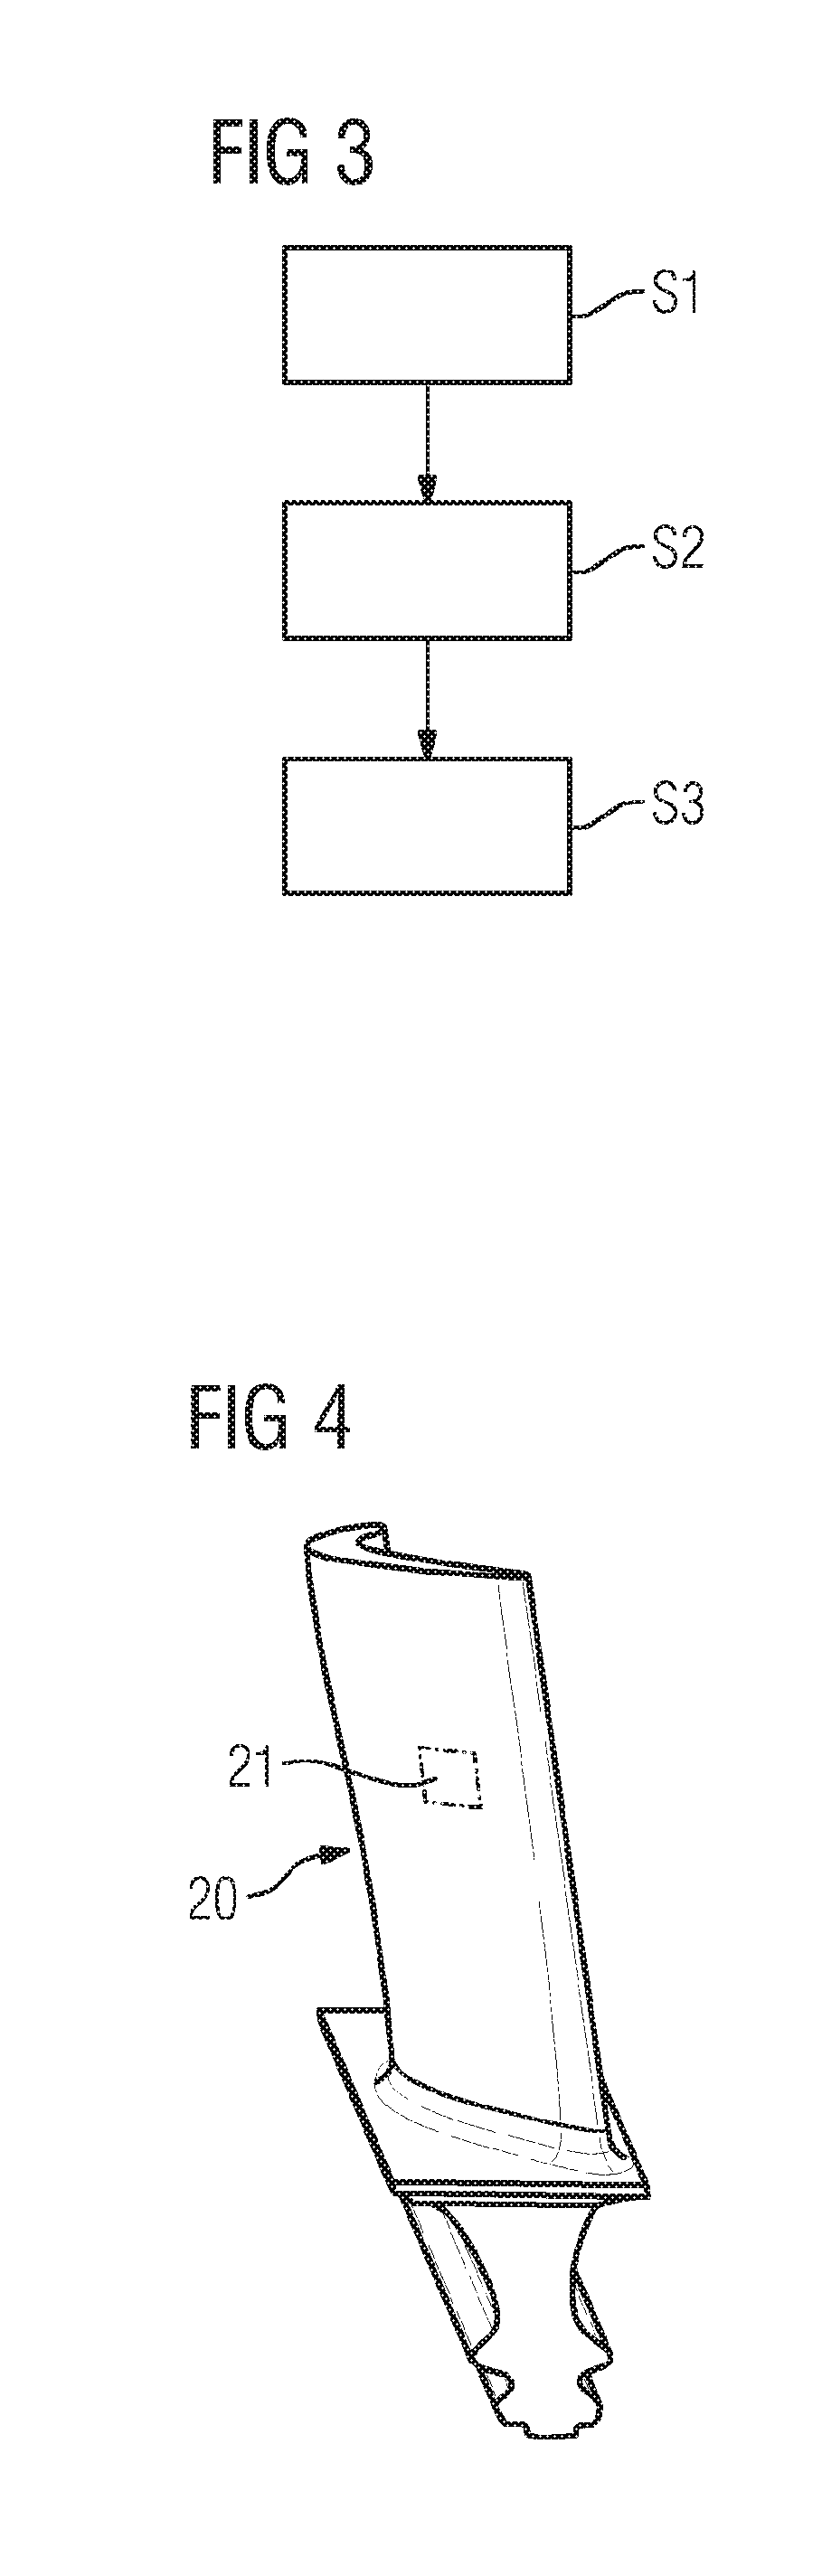 Apparatus for laser hardfacing using a wobbling movement